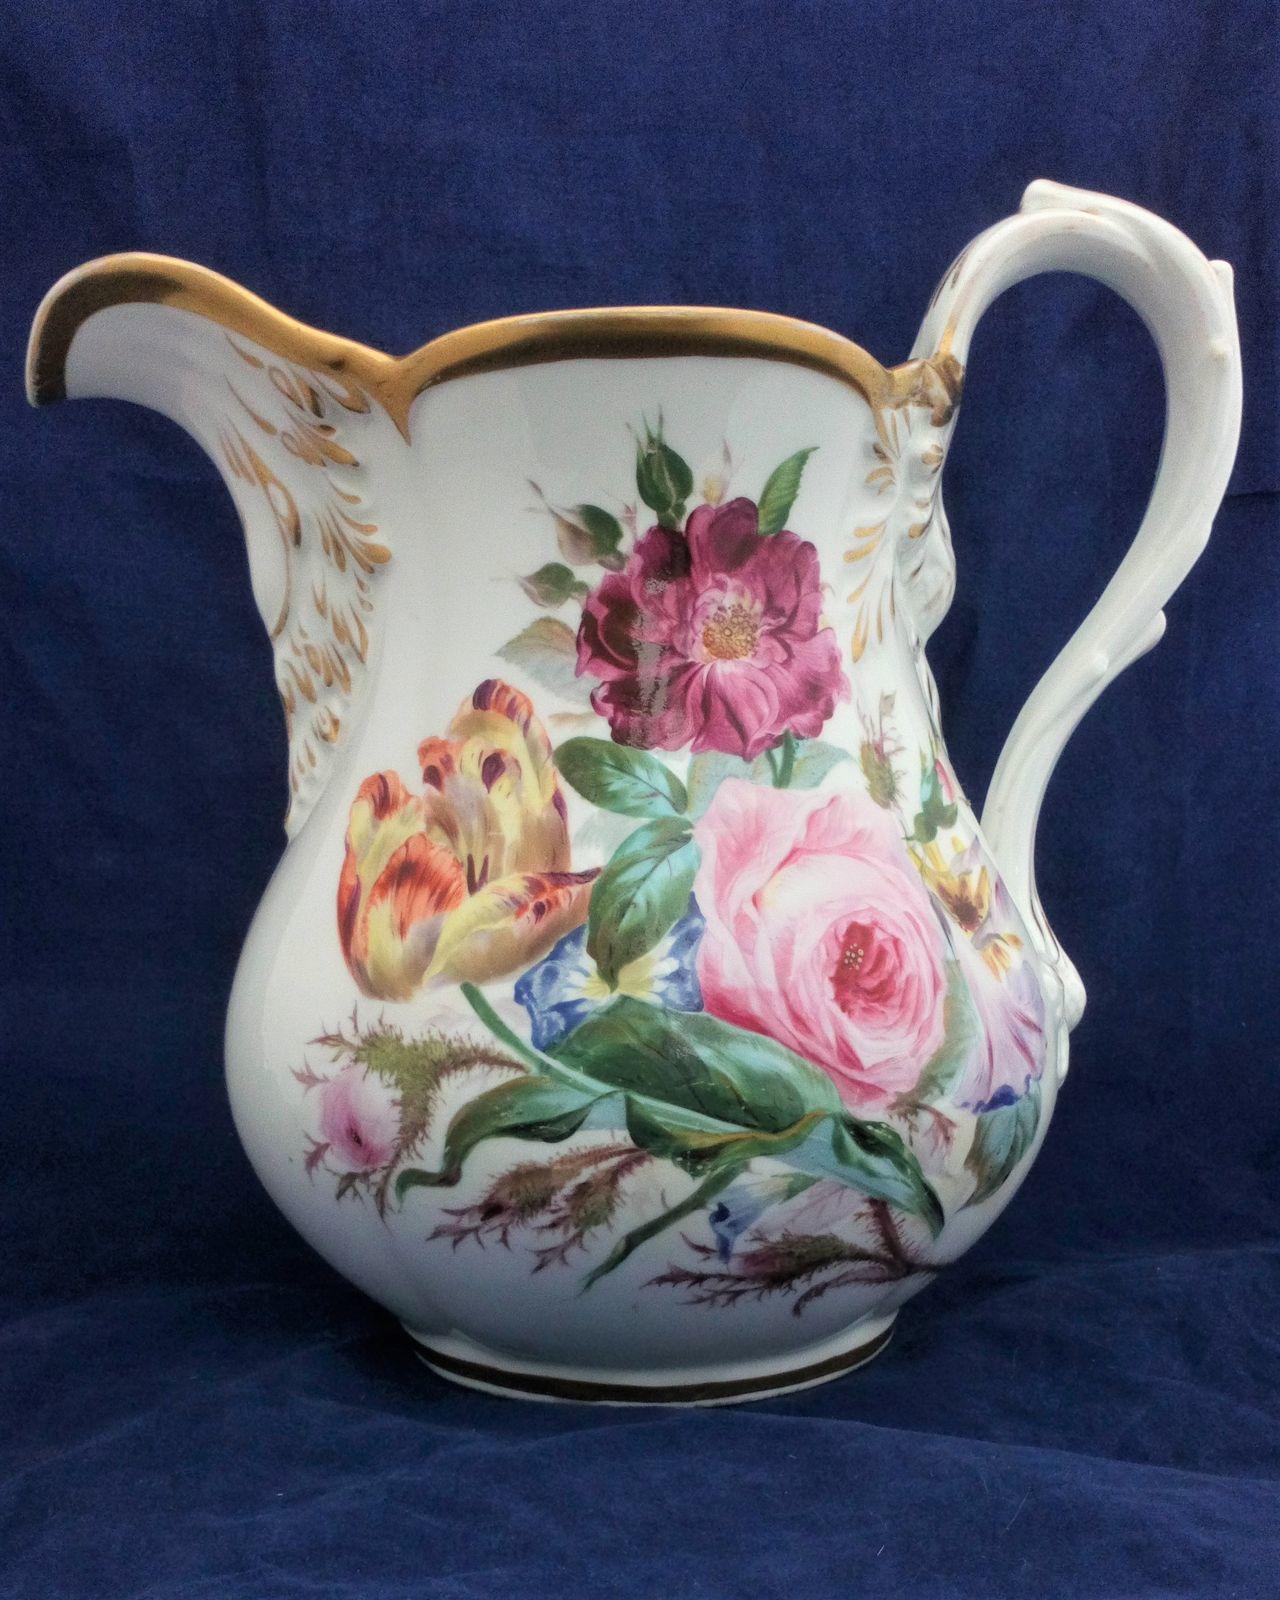 A large antique five pint capacity porcelain jug made by John Rose of Coalport probably painted by William Billingsley with Flowers circa 1825. It is 10 inches high.